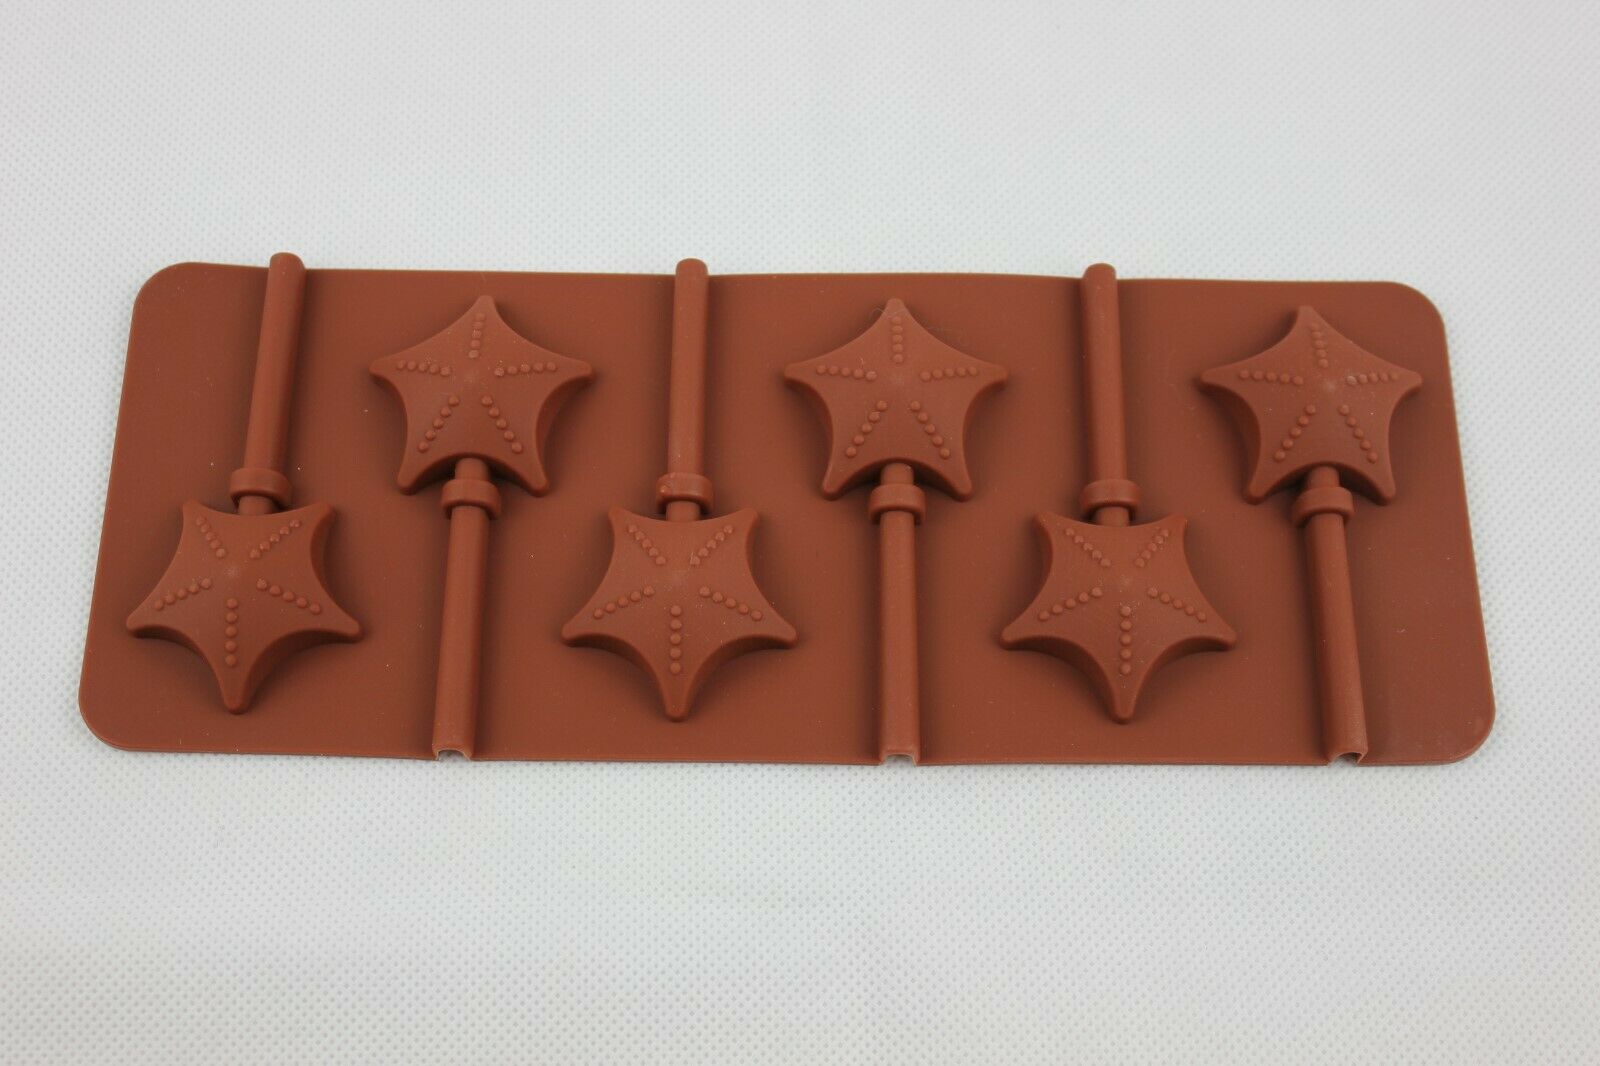 6 STAR SHAPE SILICONE CHOCOLATE LOLLY CANDLE MOULD WITH STICKS